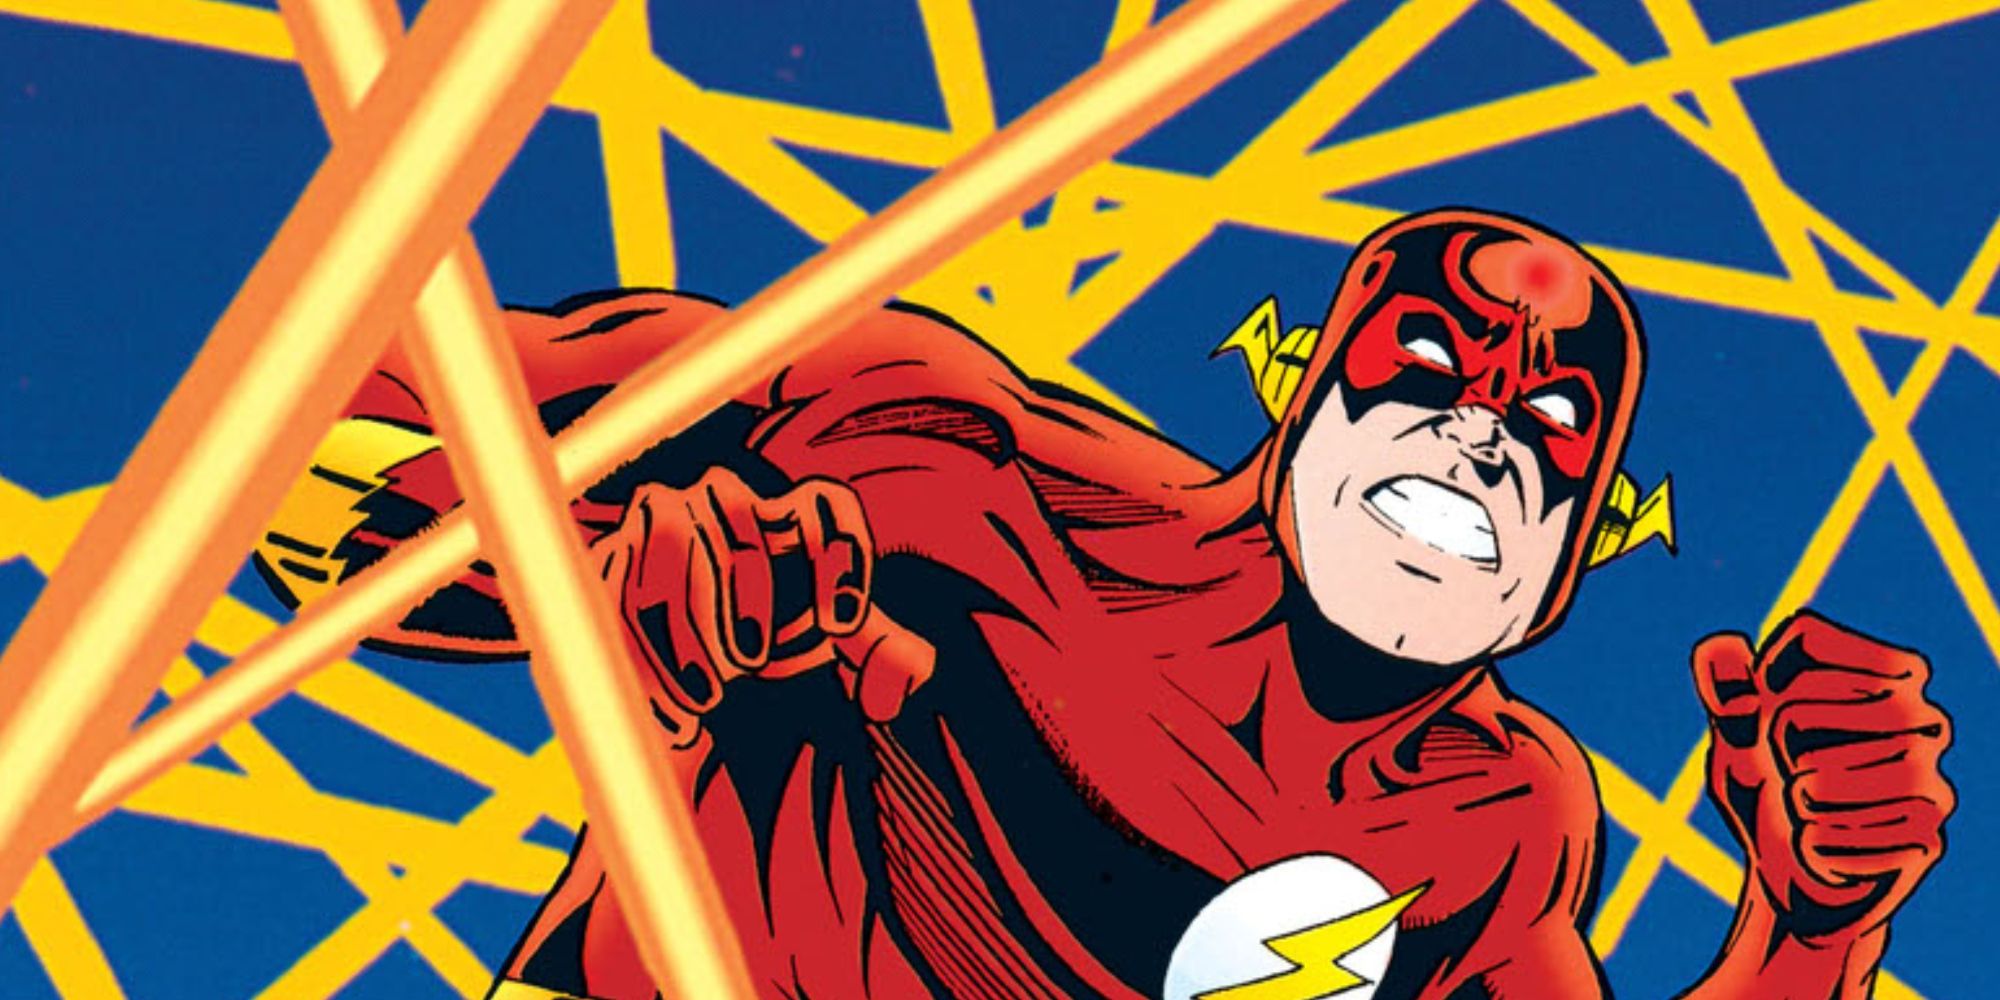 The Flash is trapped by lasers in DC Comics.